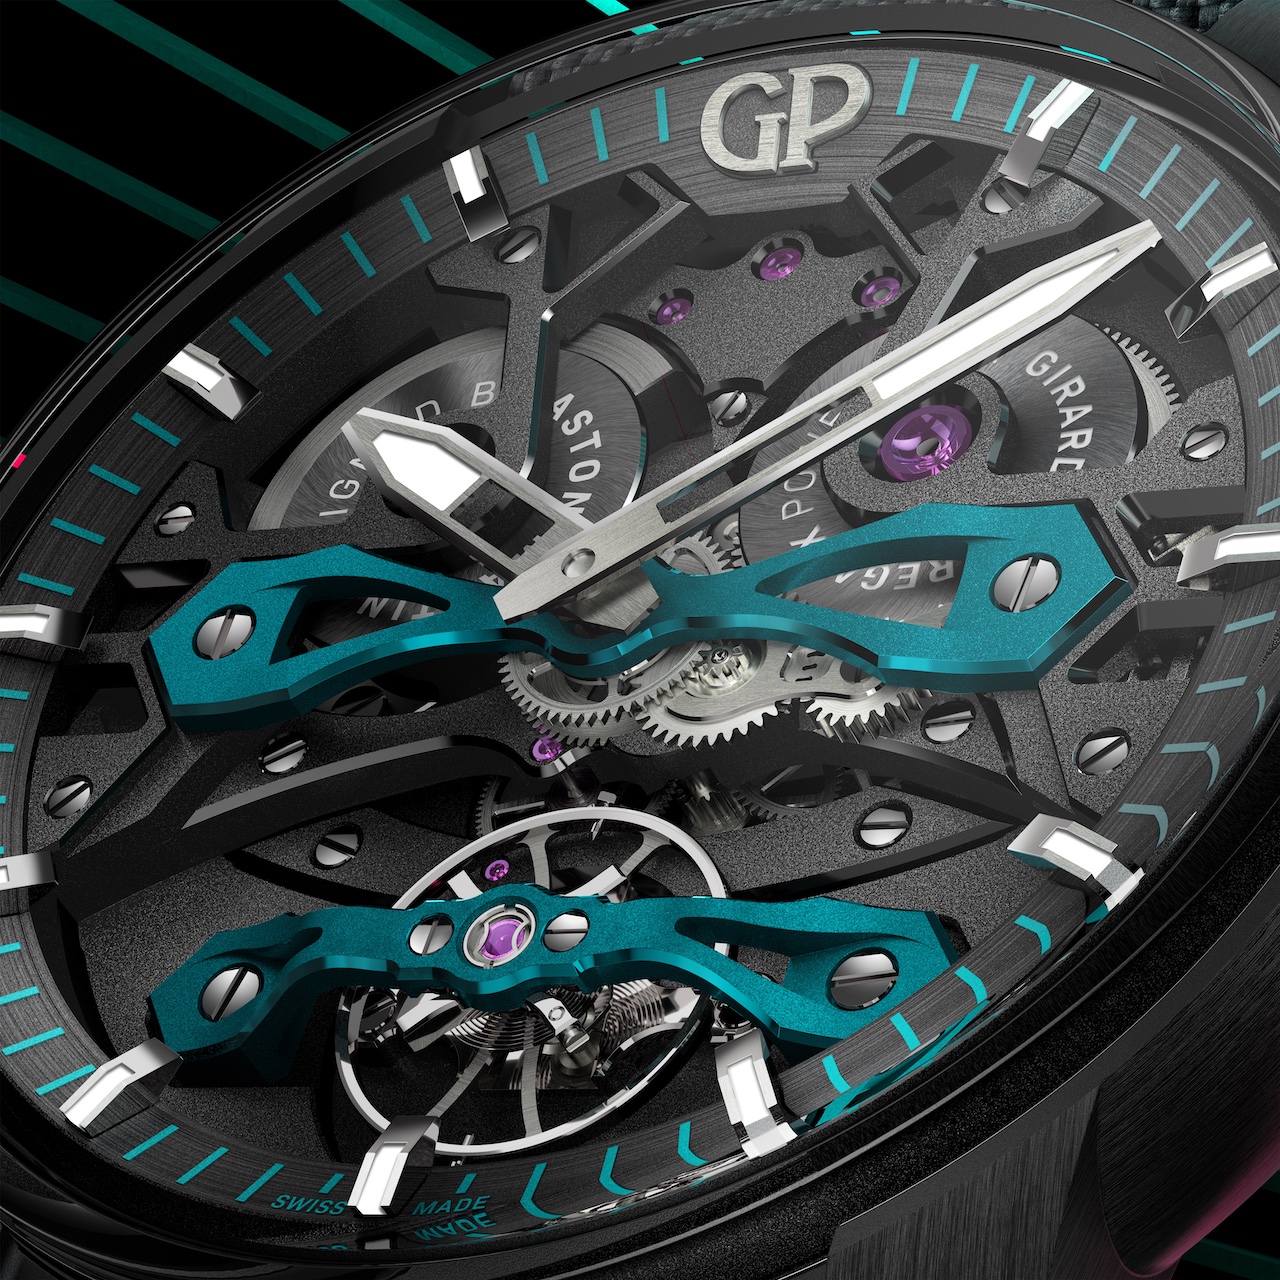 Aston Martin and Girard-Perregaux have reimagined ‘the bridge’, one of the oldest mechanical signatures in watchmaking, with the Neo Bridges Aston Martin Edition.